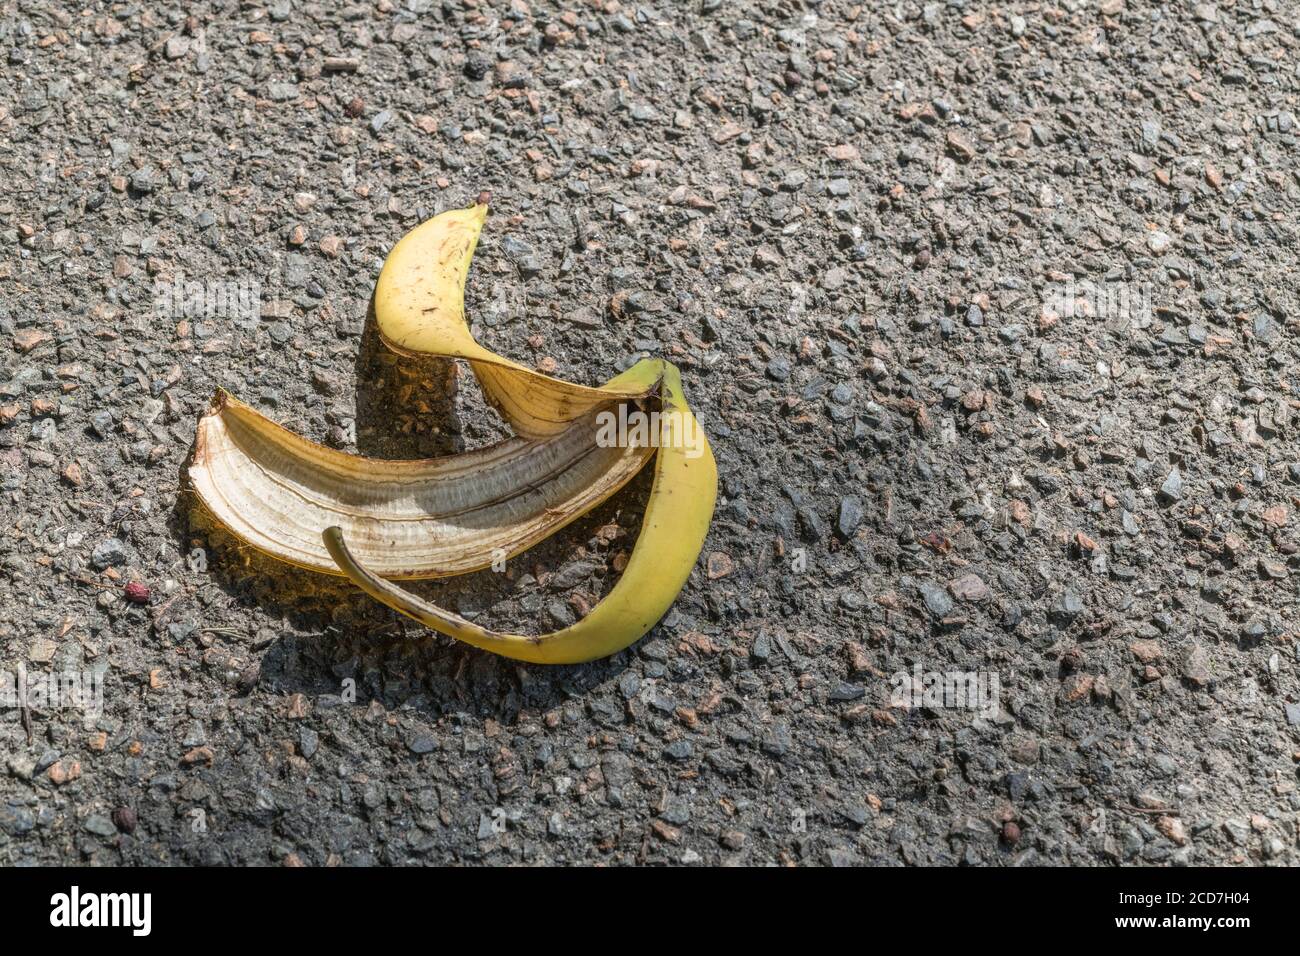 Discarded banana skin / banana peel left on asphalt footpath / pavement, with slight shadow from overhead tree branch. For slip-up, faux pas, blunder. Stock Photo